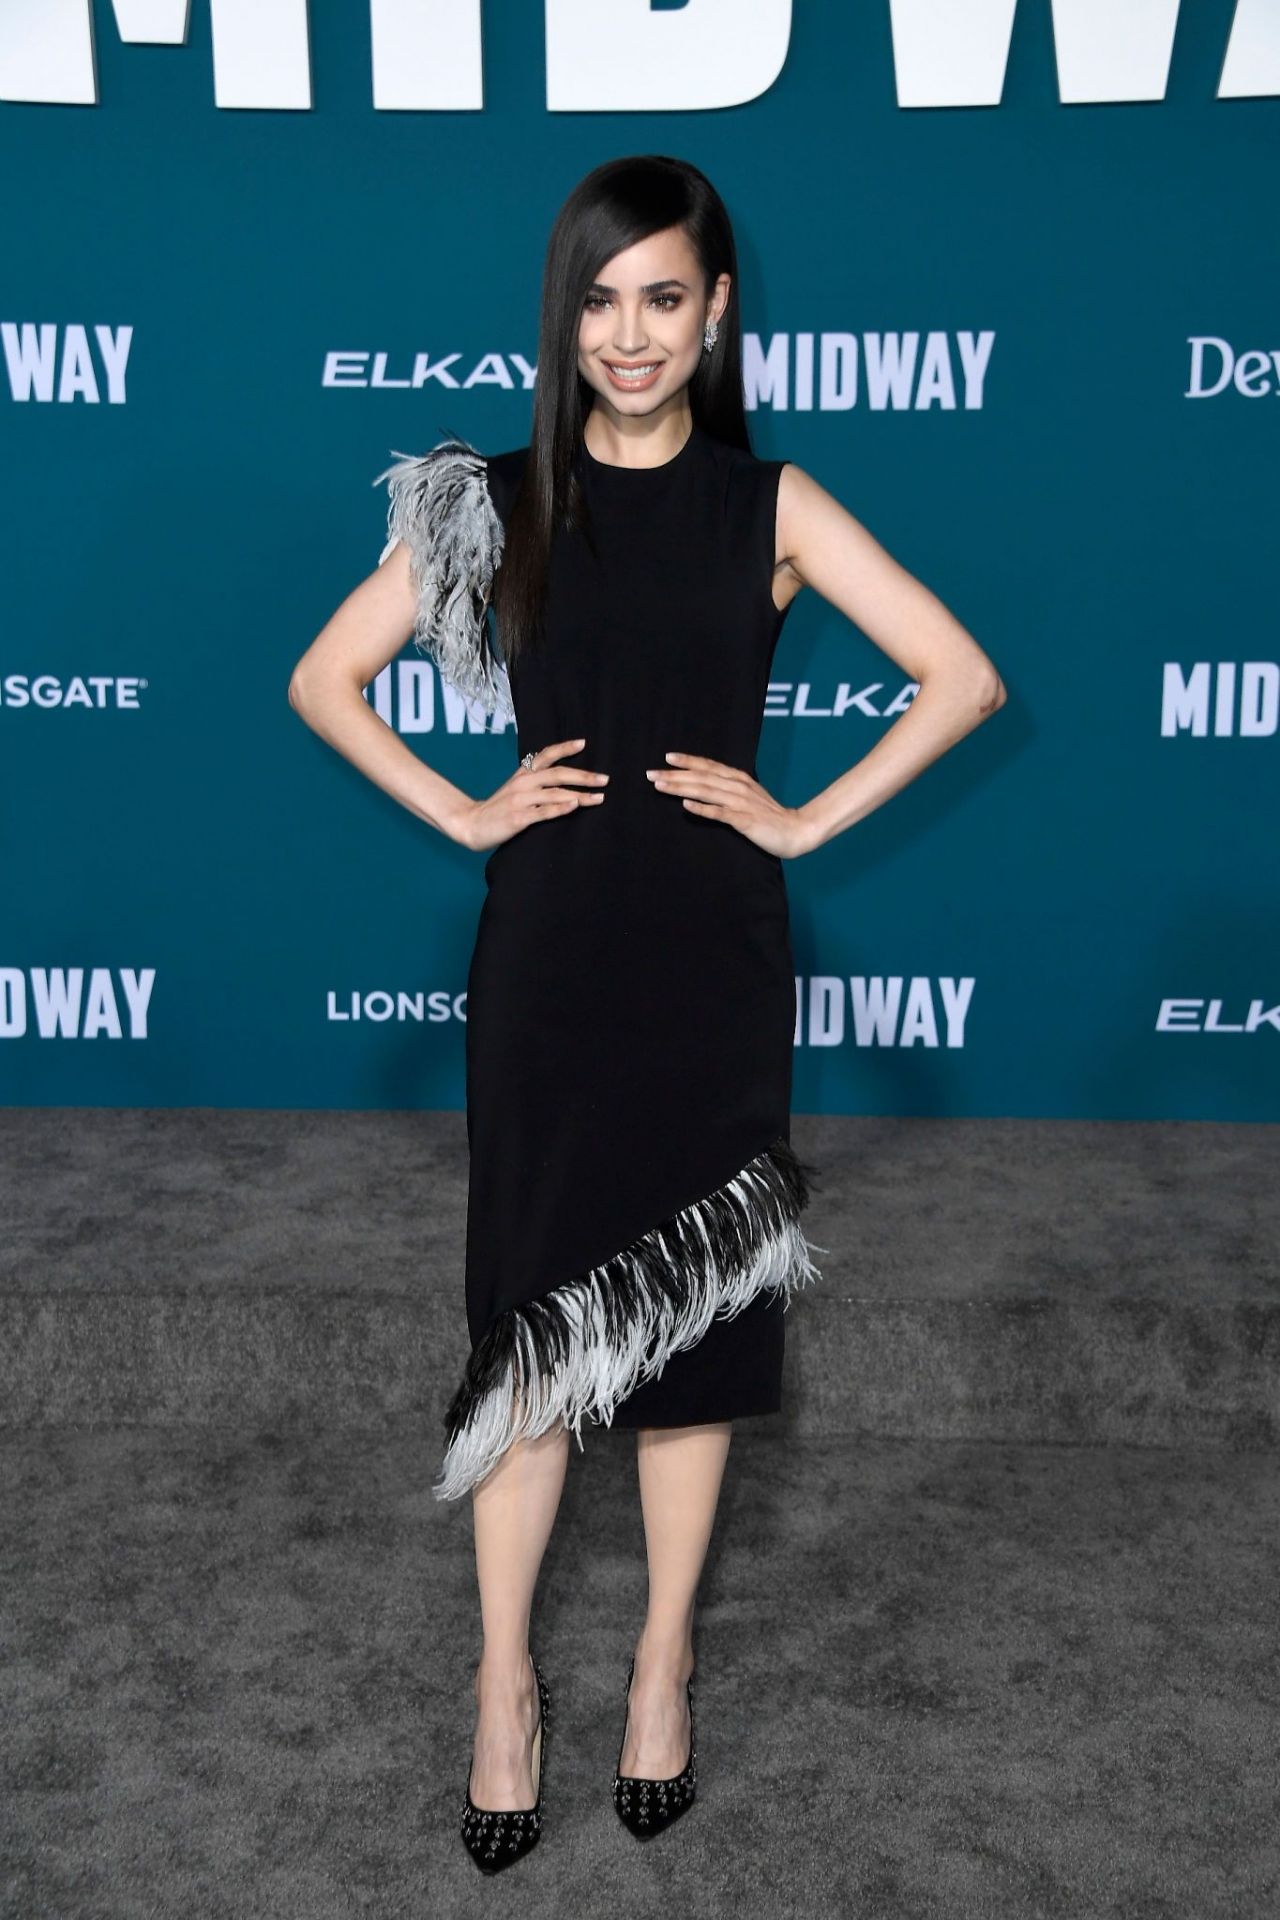 sofia-carson-in-christopher-kane-midway-premiere-in-westwood